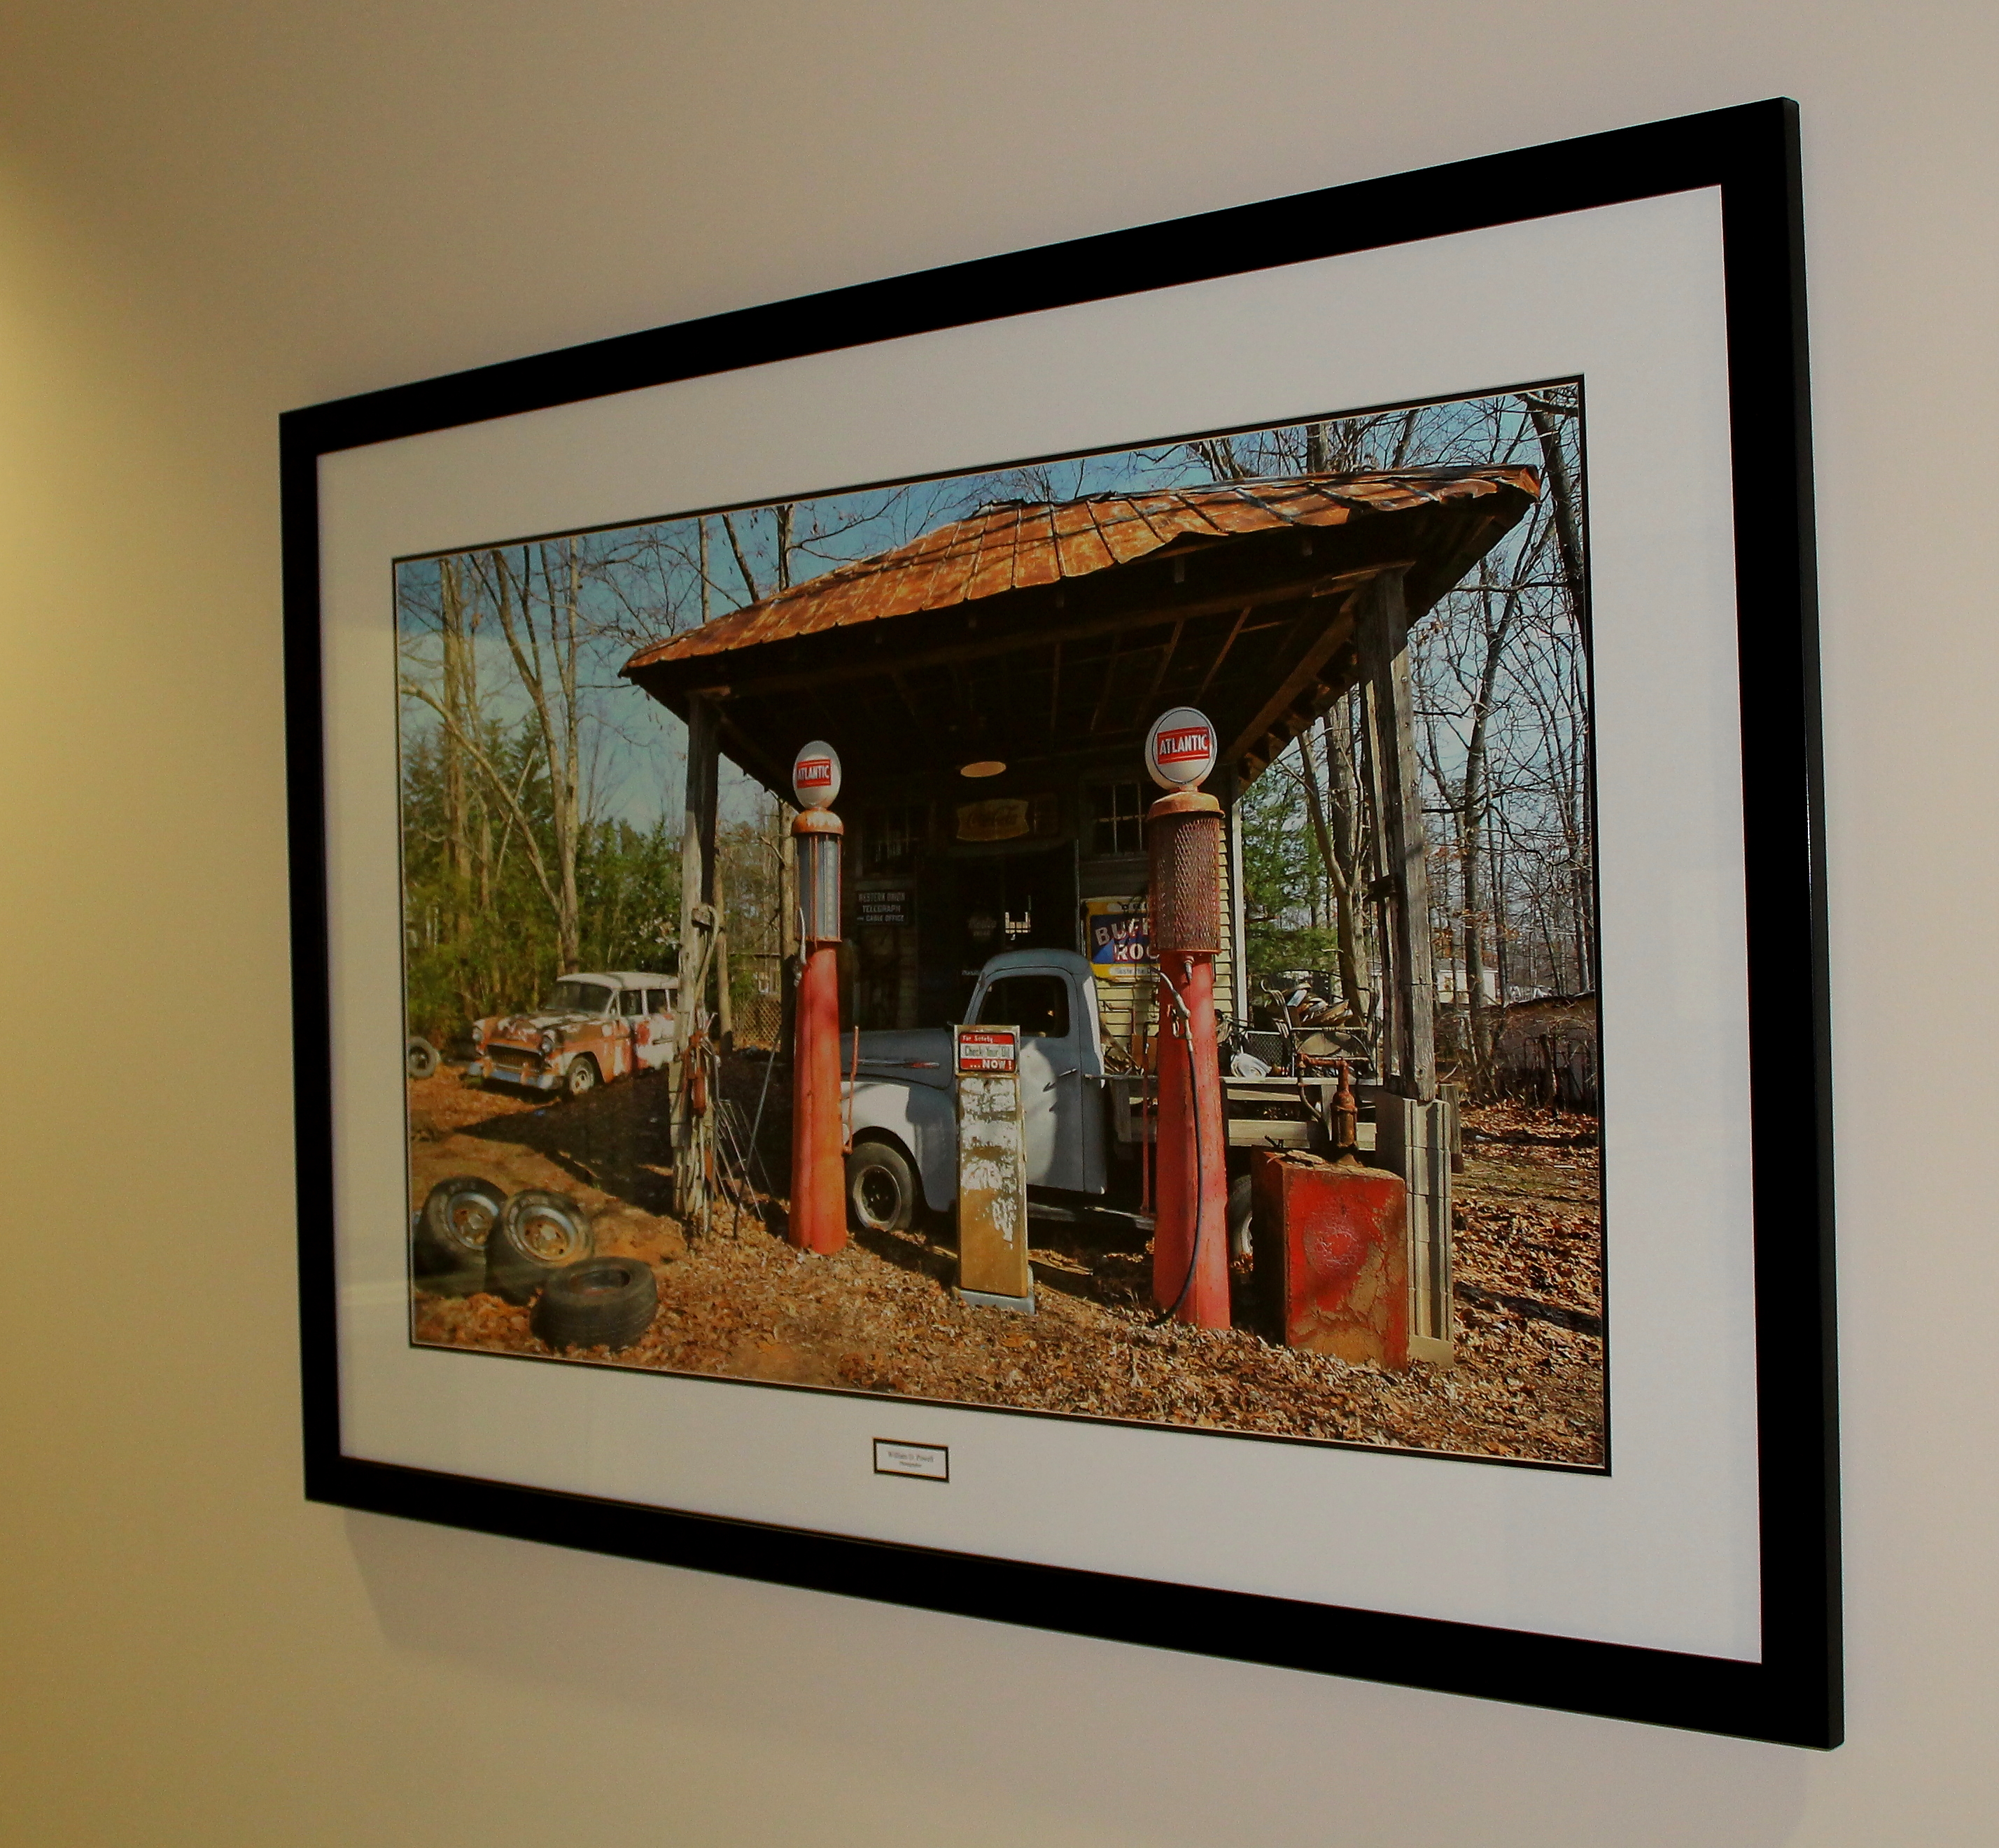 Original photography printed in-house - overall size 40" x 60"